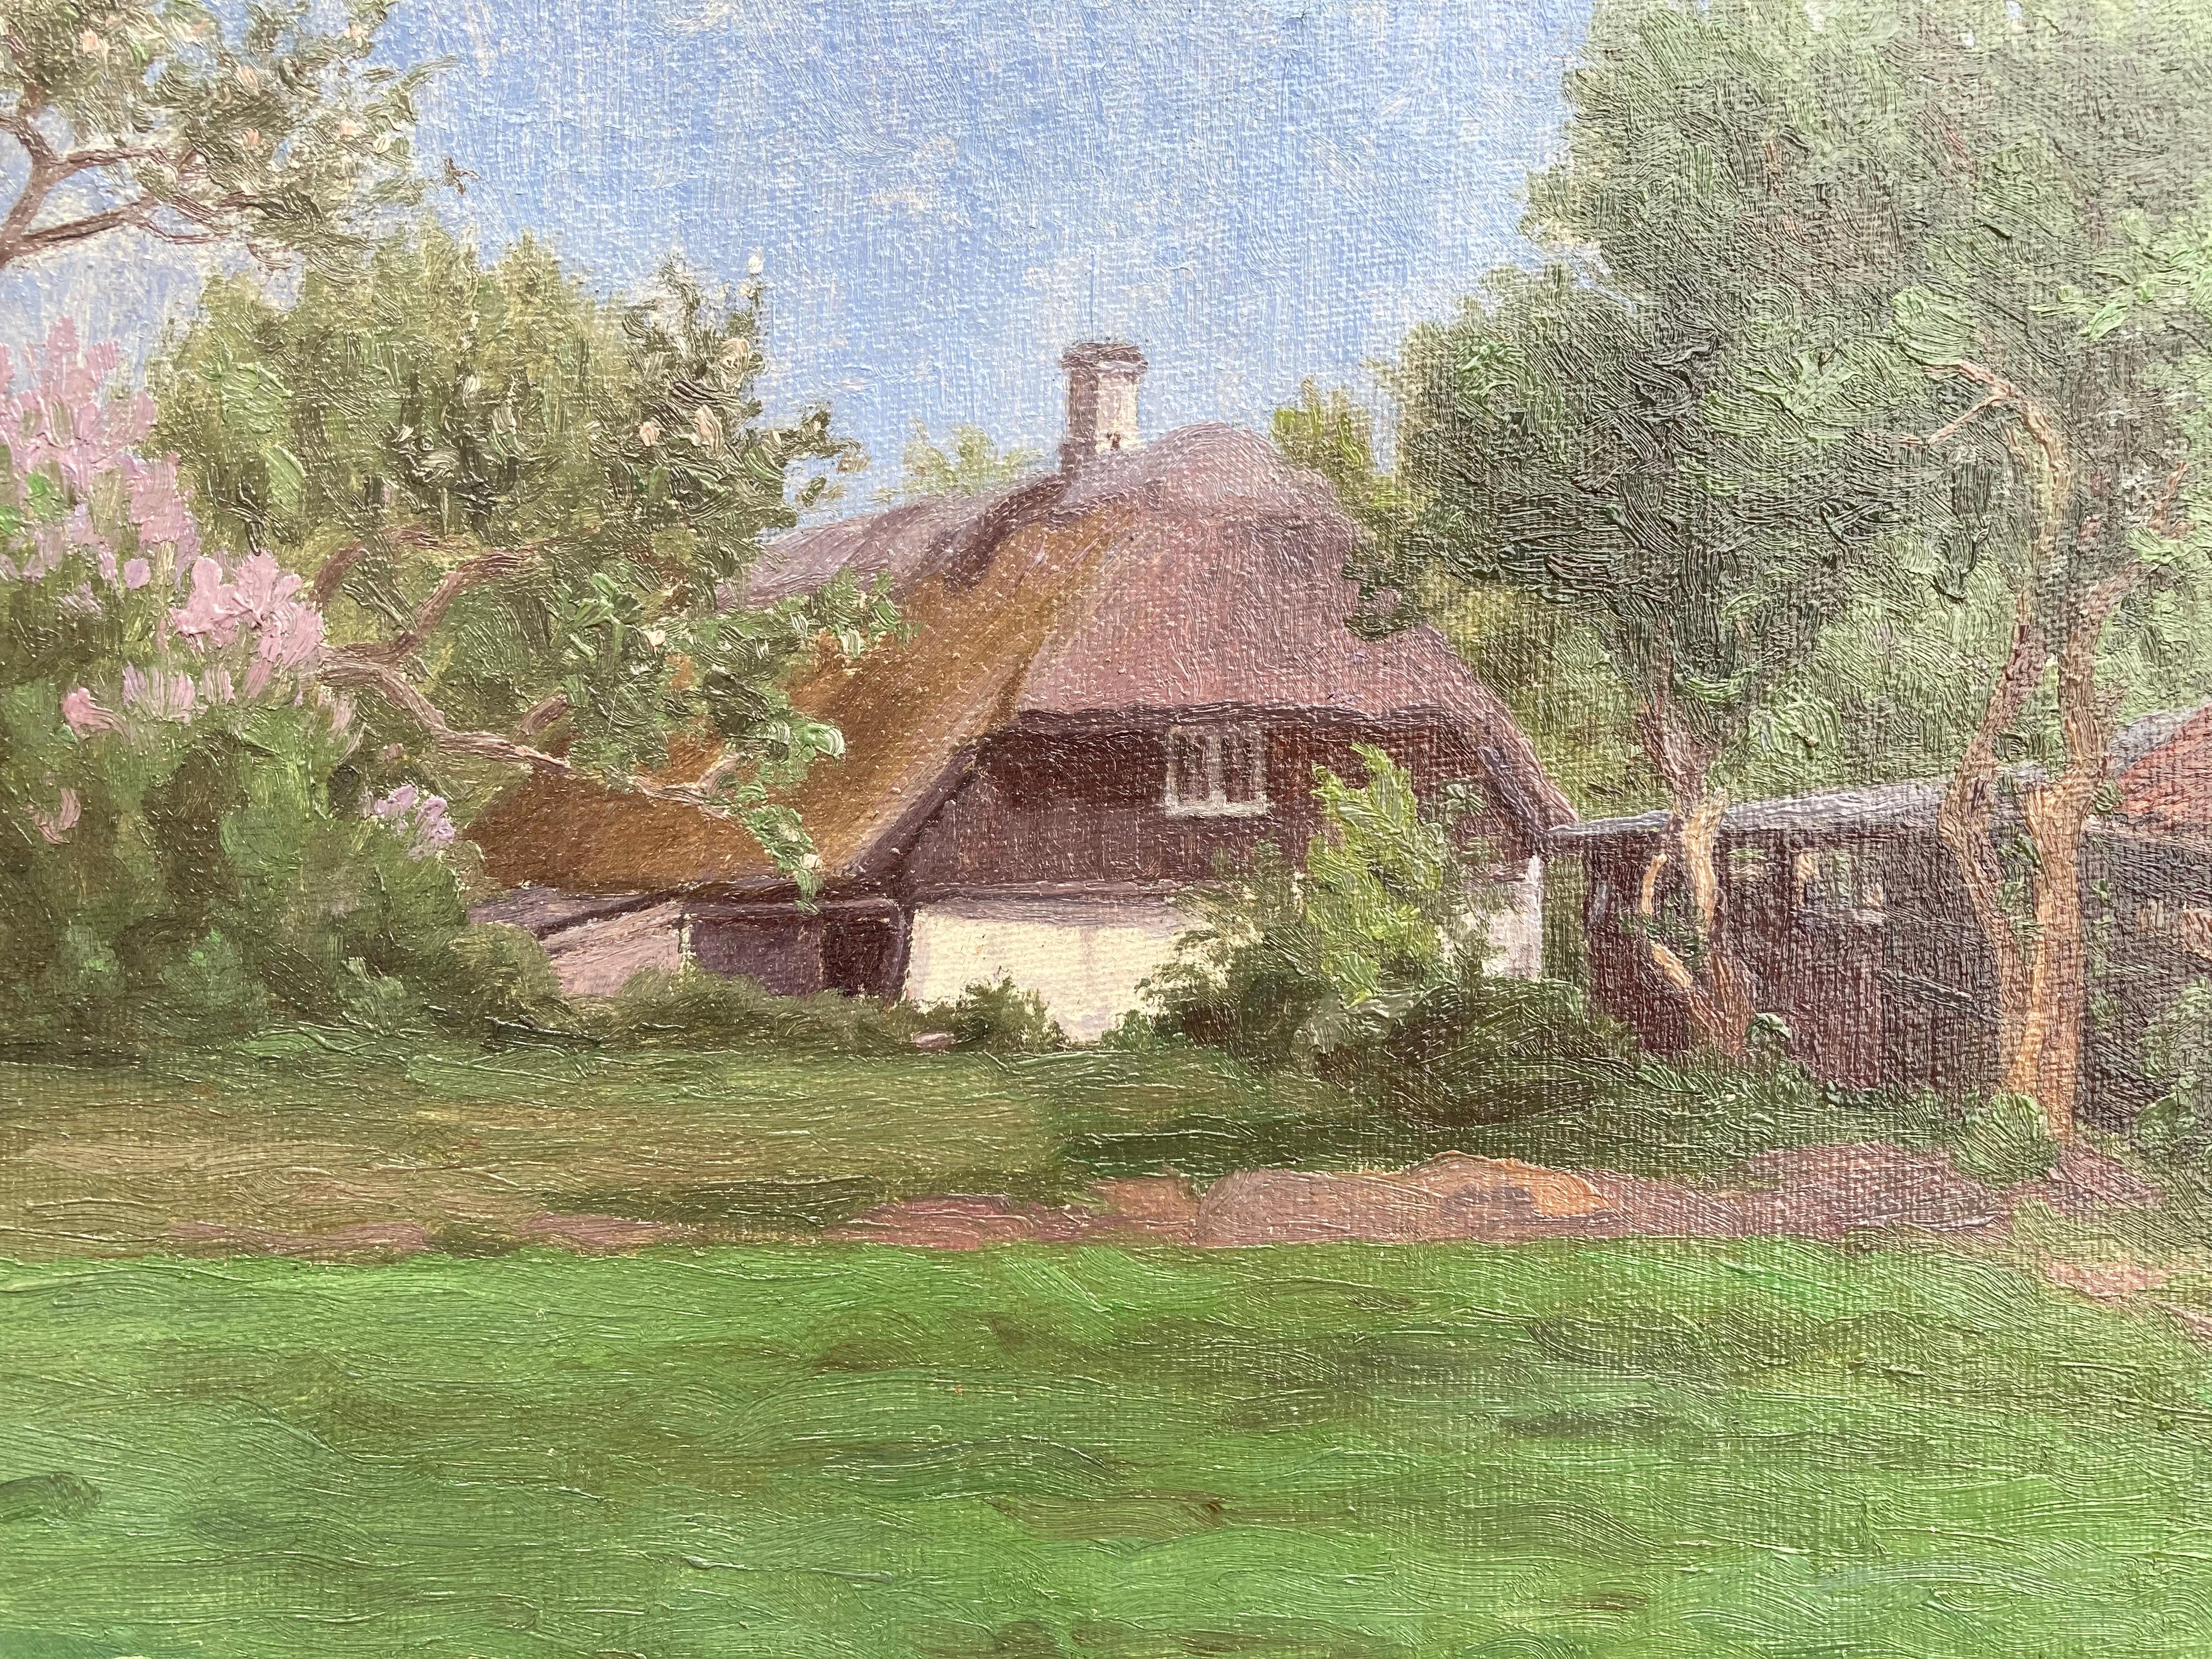 Doesn't this scene just make you want to be there, in this cottage in the country? I liked this painting enough that I actually put some money into it with a restorer to get it into great shape. It was painted in 1917. There's an inscription on the